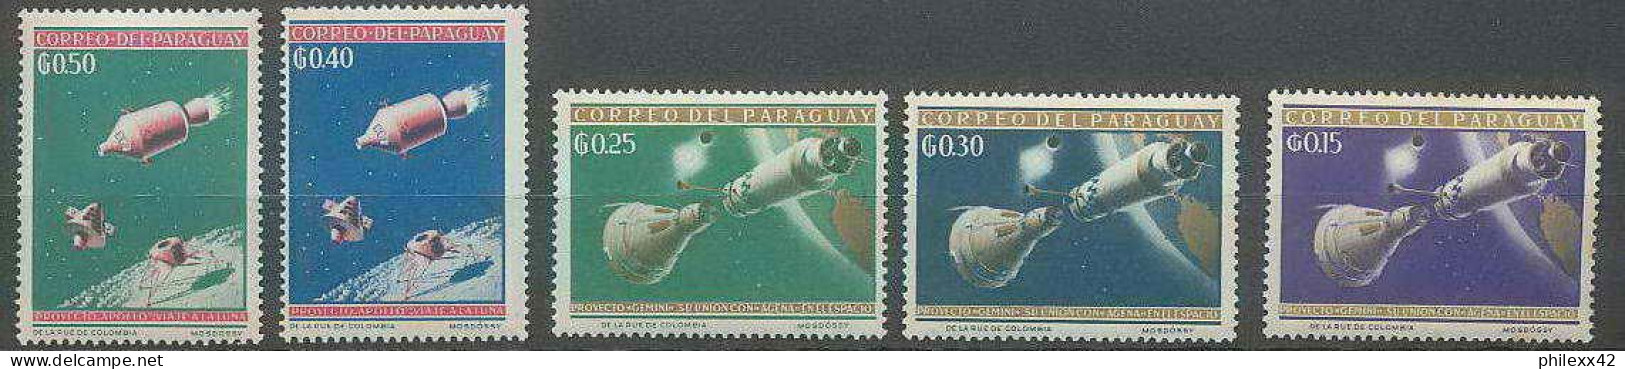 1231/ Espace (space) Neuf ** MNH Paraguay Apollo - South America